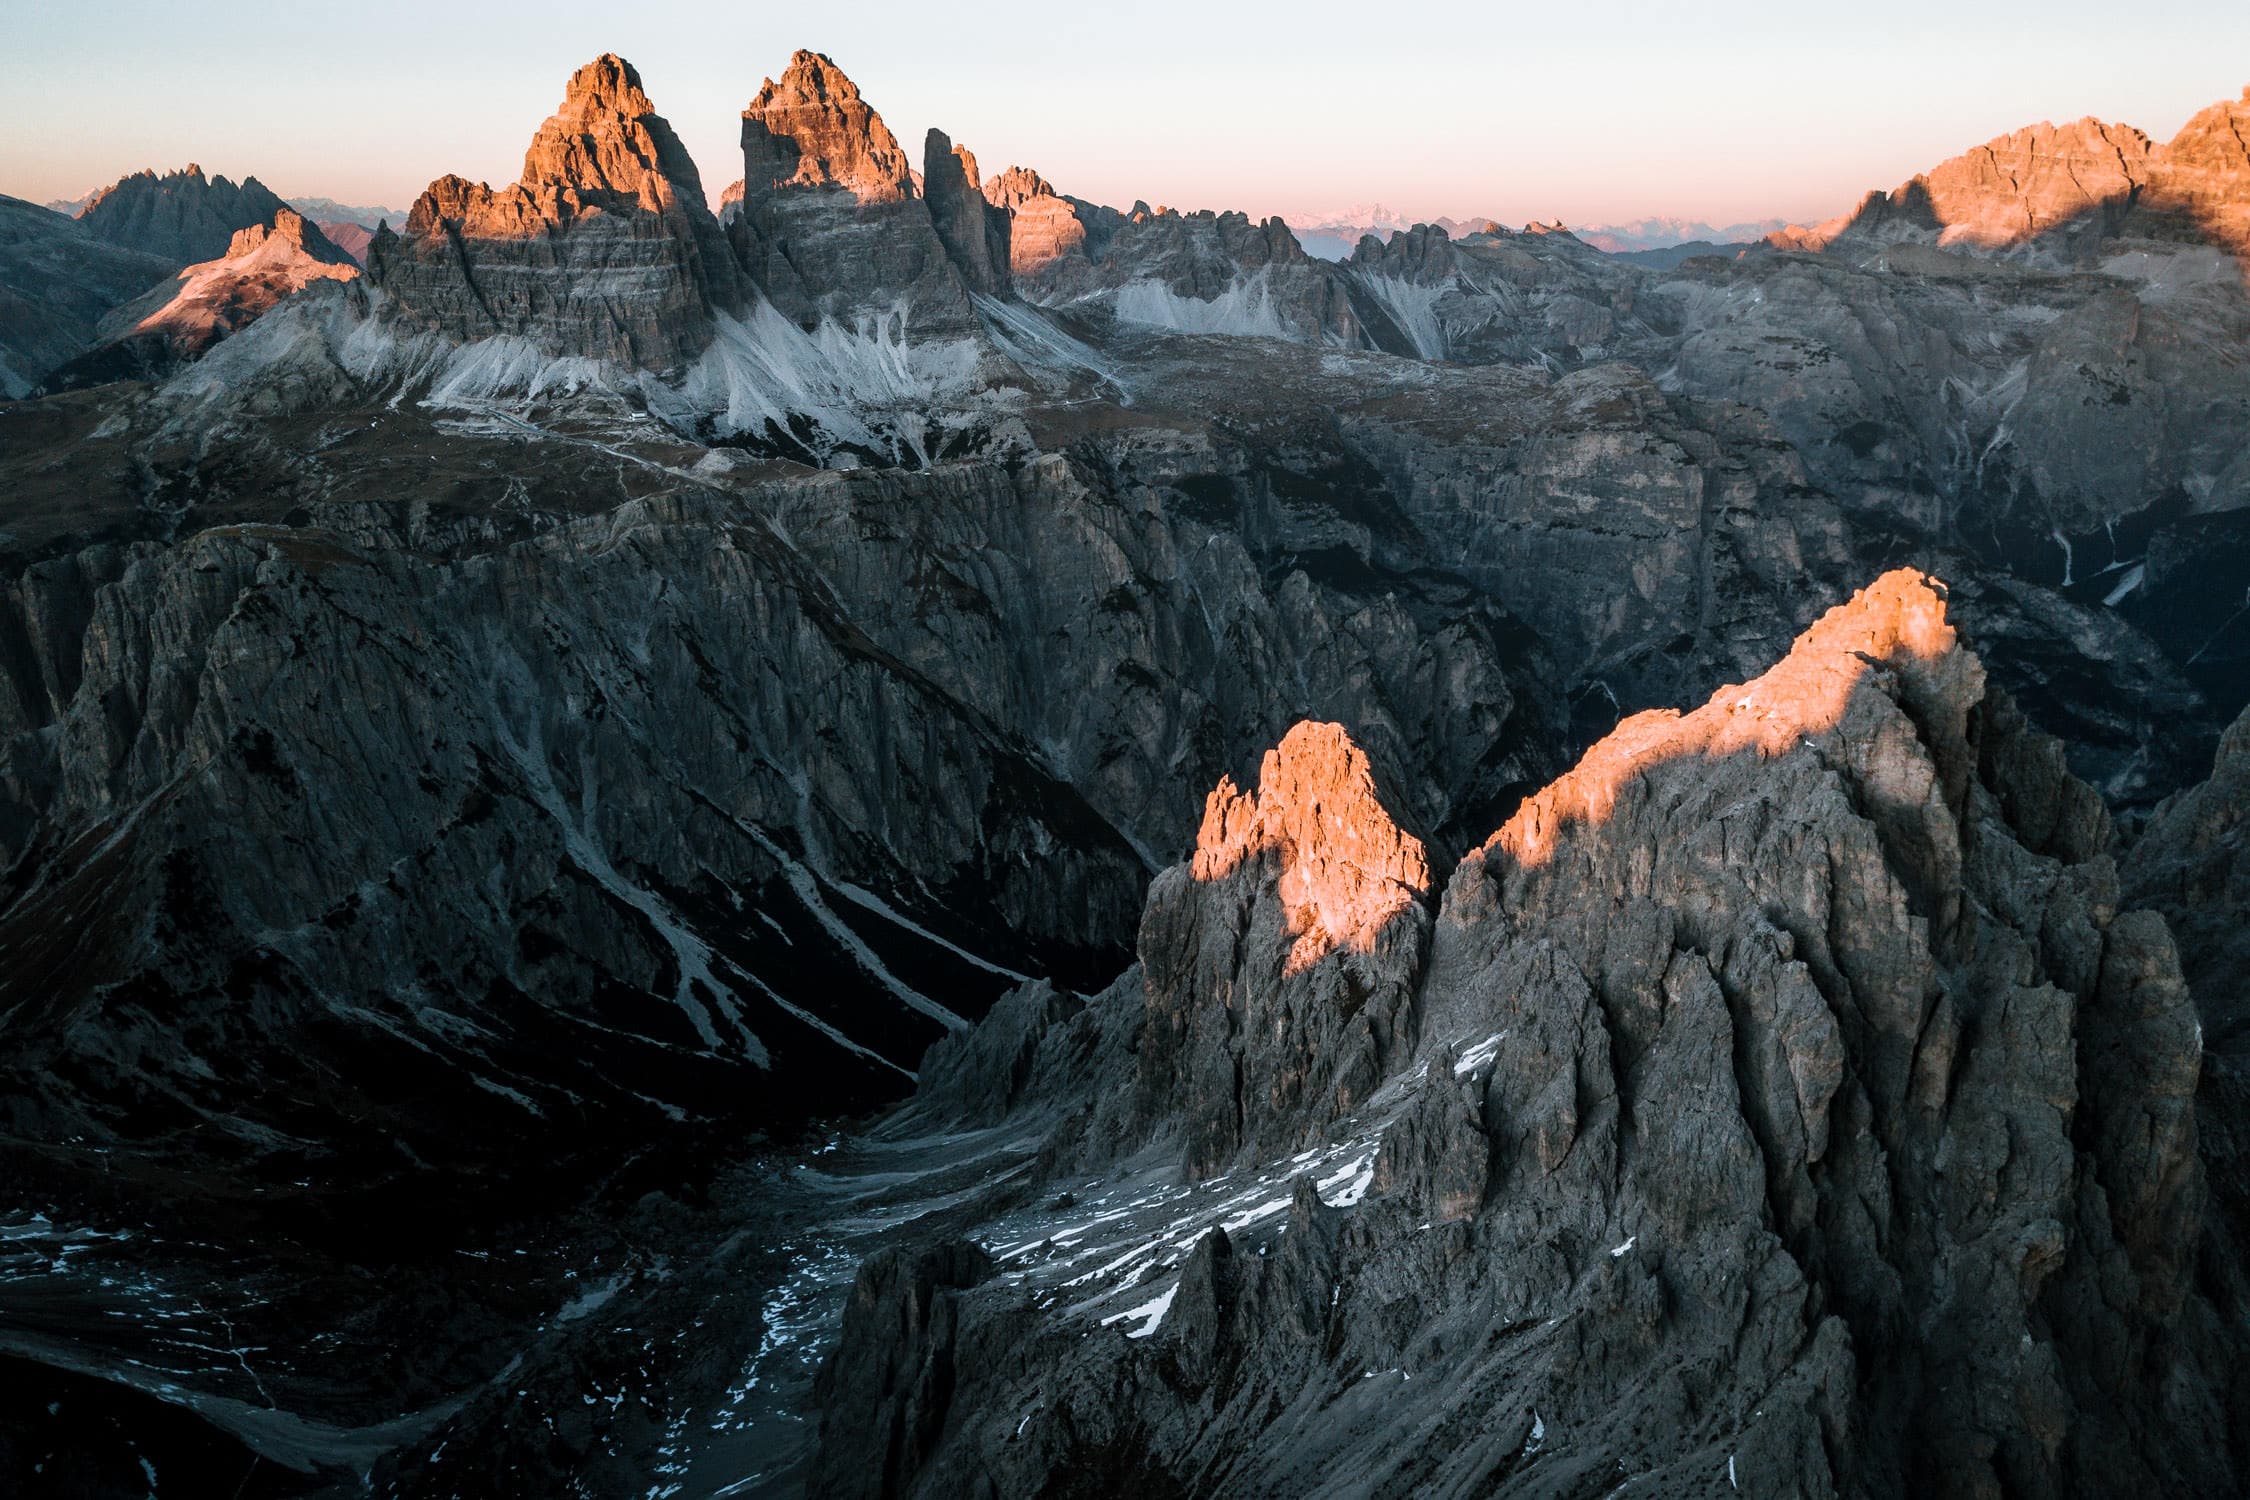 A beautiful sunset lights up the landscape in the Italian Dolomites shining a warm, orange light on the Tre Cime mountains. By photographer Michael Schauer